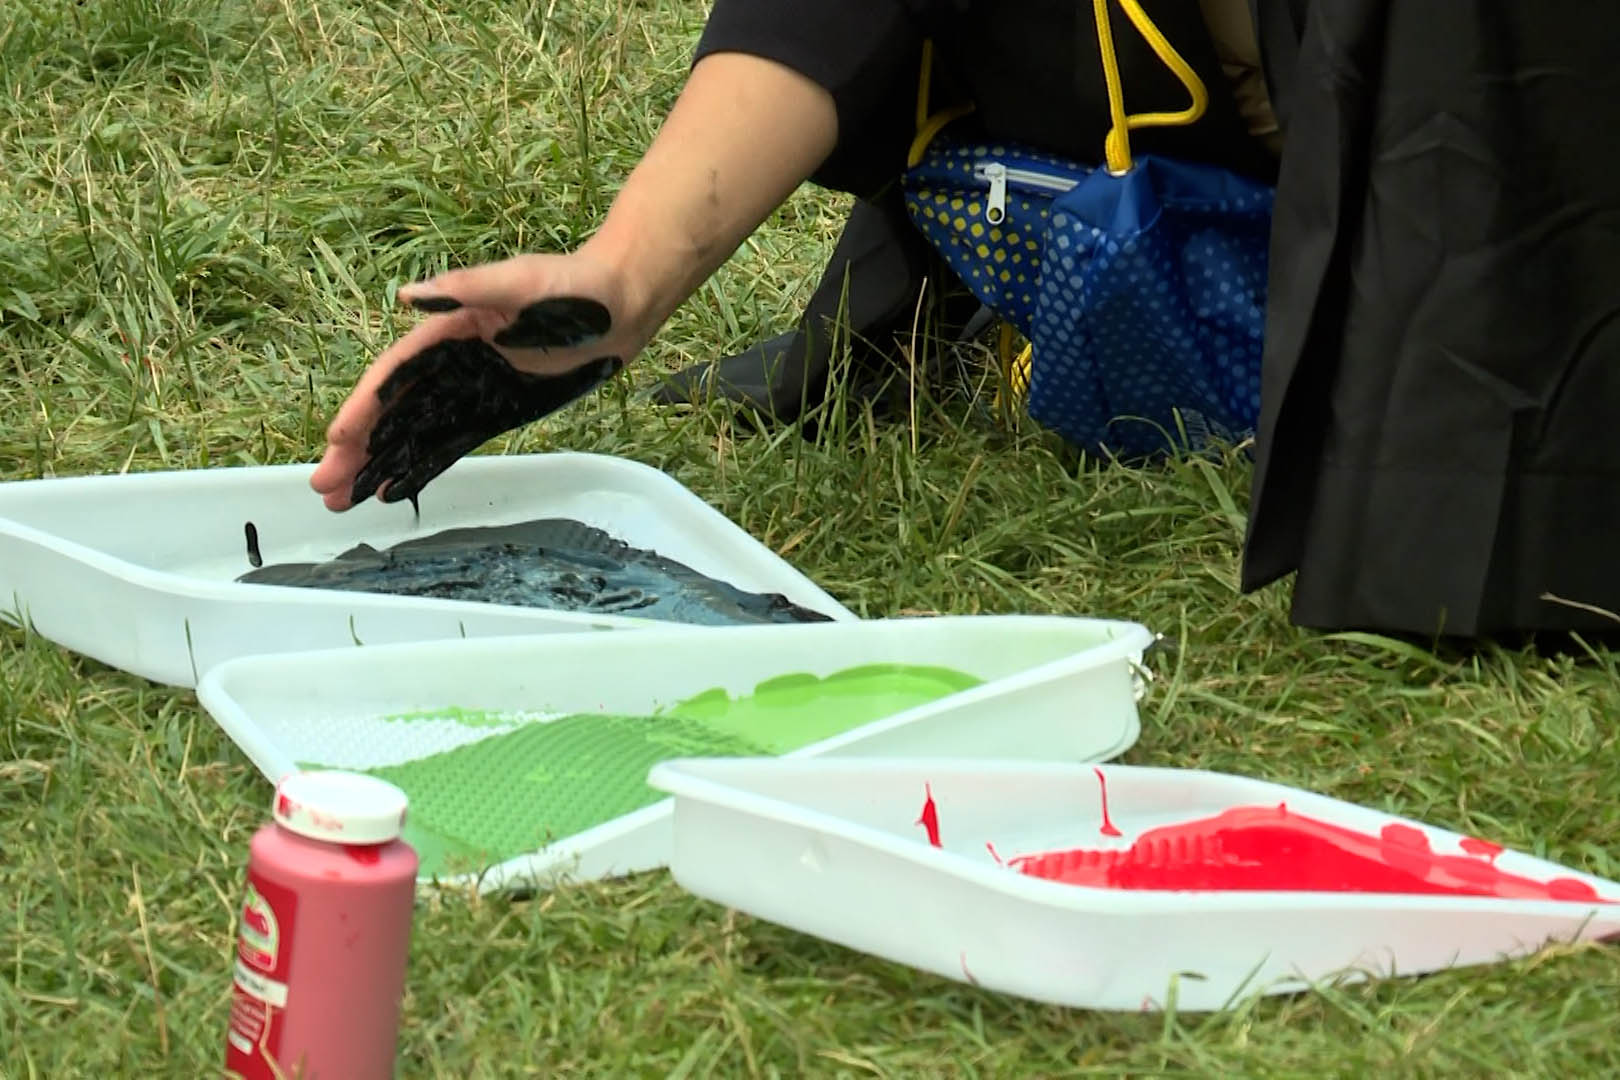 An IU student dips their hand in paint during an alternative commencement ceremony Saturday in Dunn Meadow.